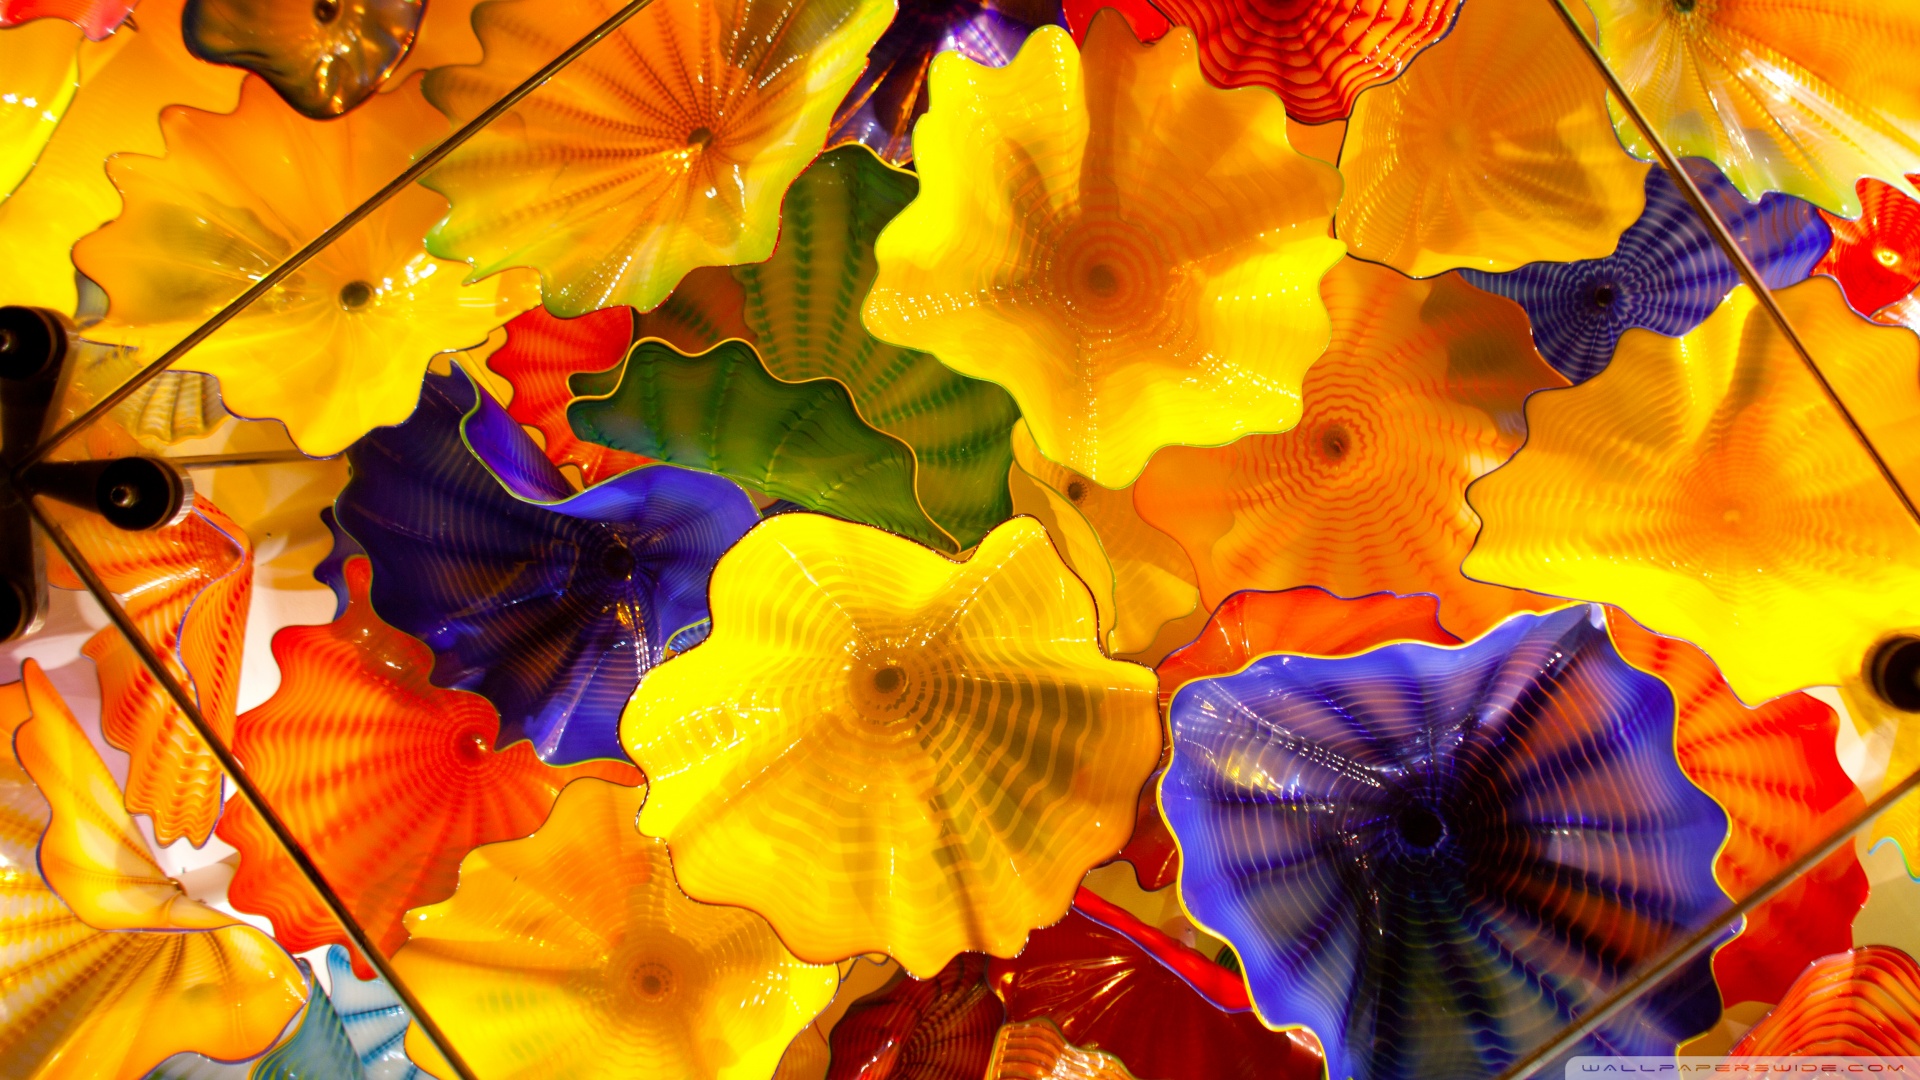 Glass Sculpture By Dale Chihuly Wallpaper